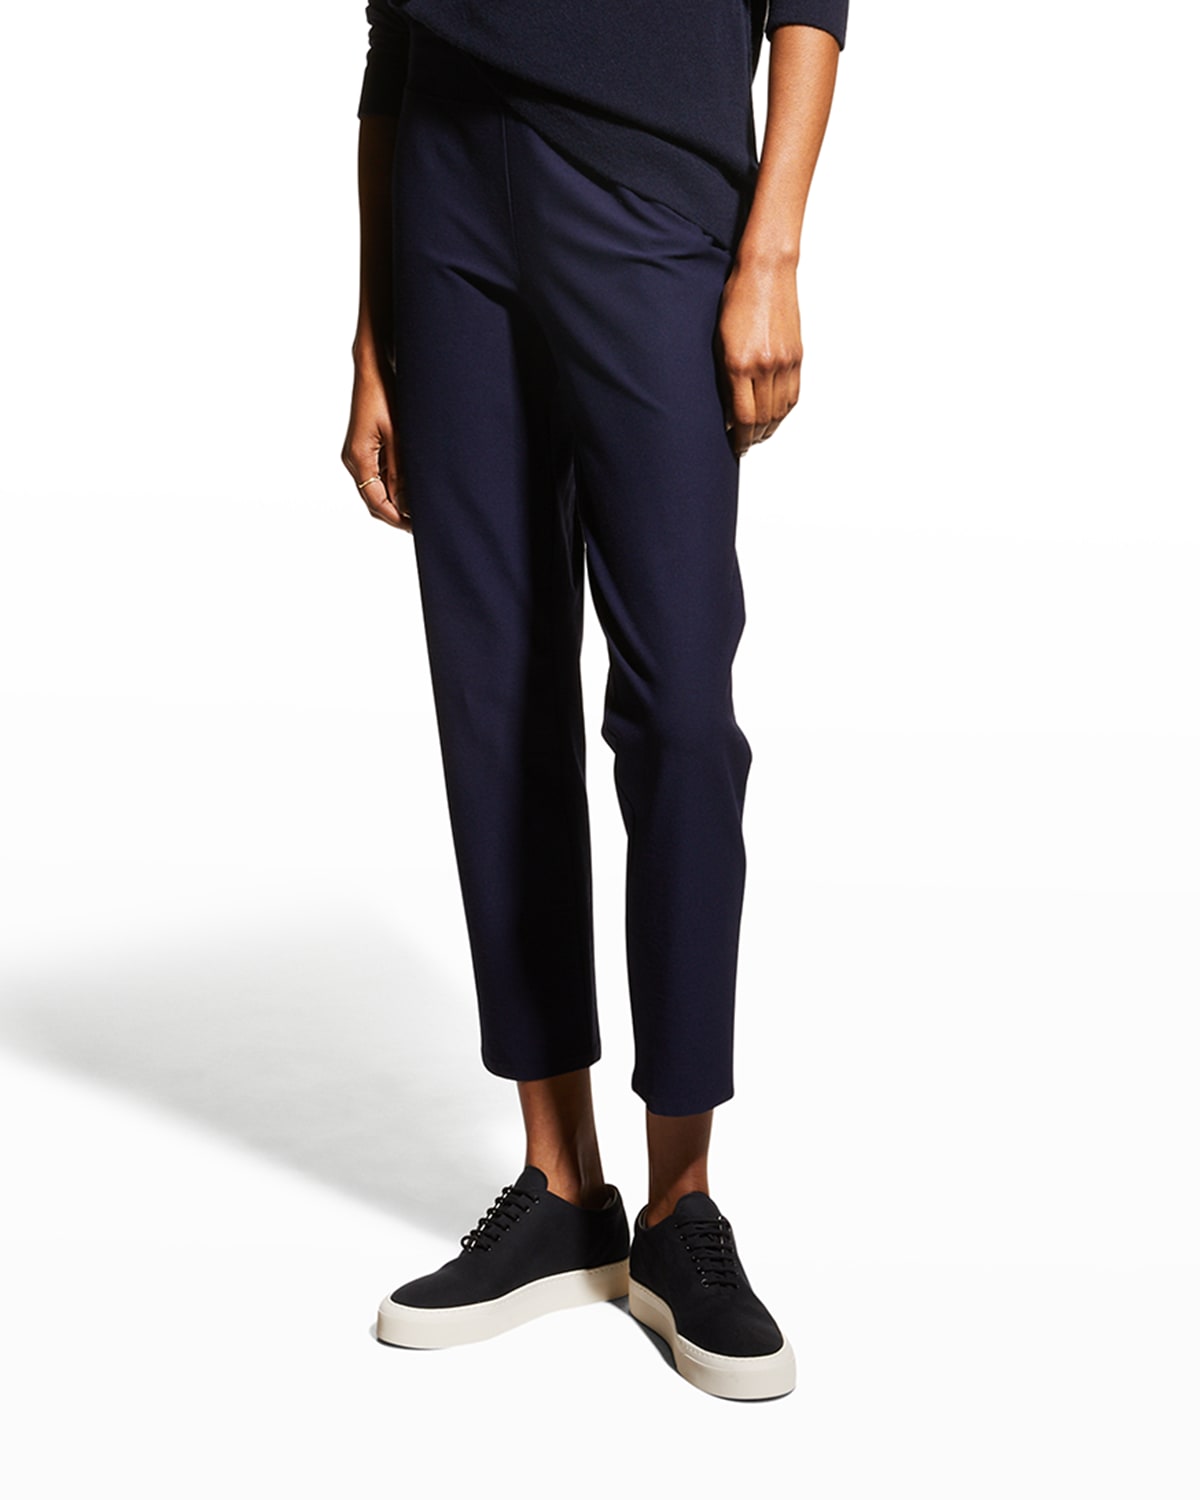 Eileen Fisher High-Waist Washable Stretch Crepe Slim Ankle Pant